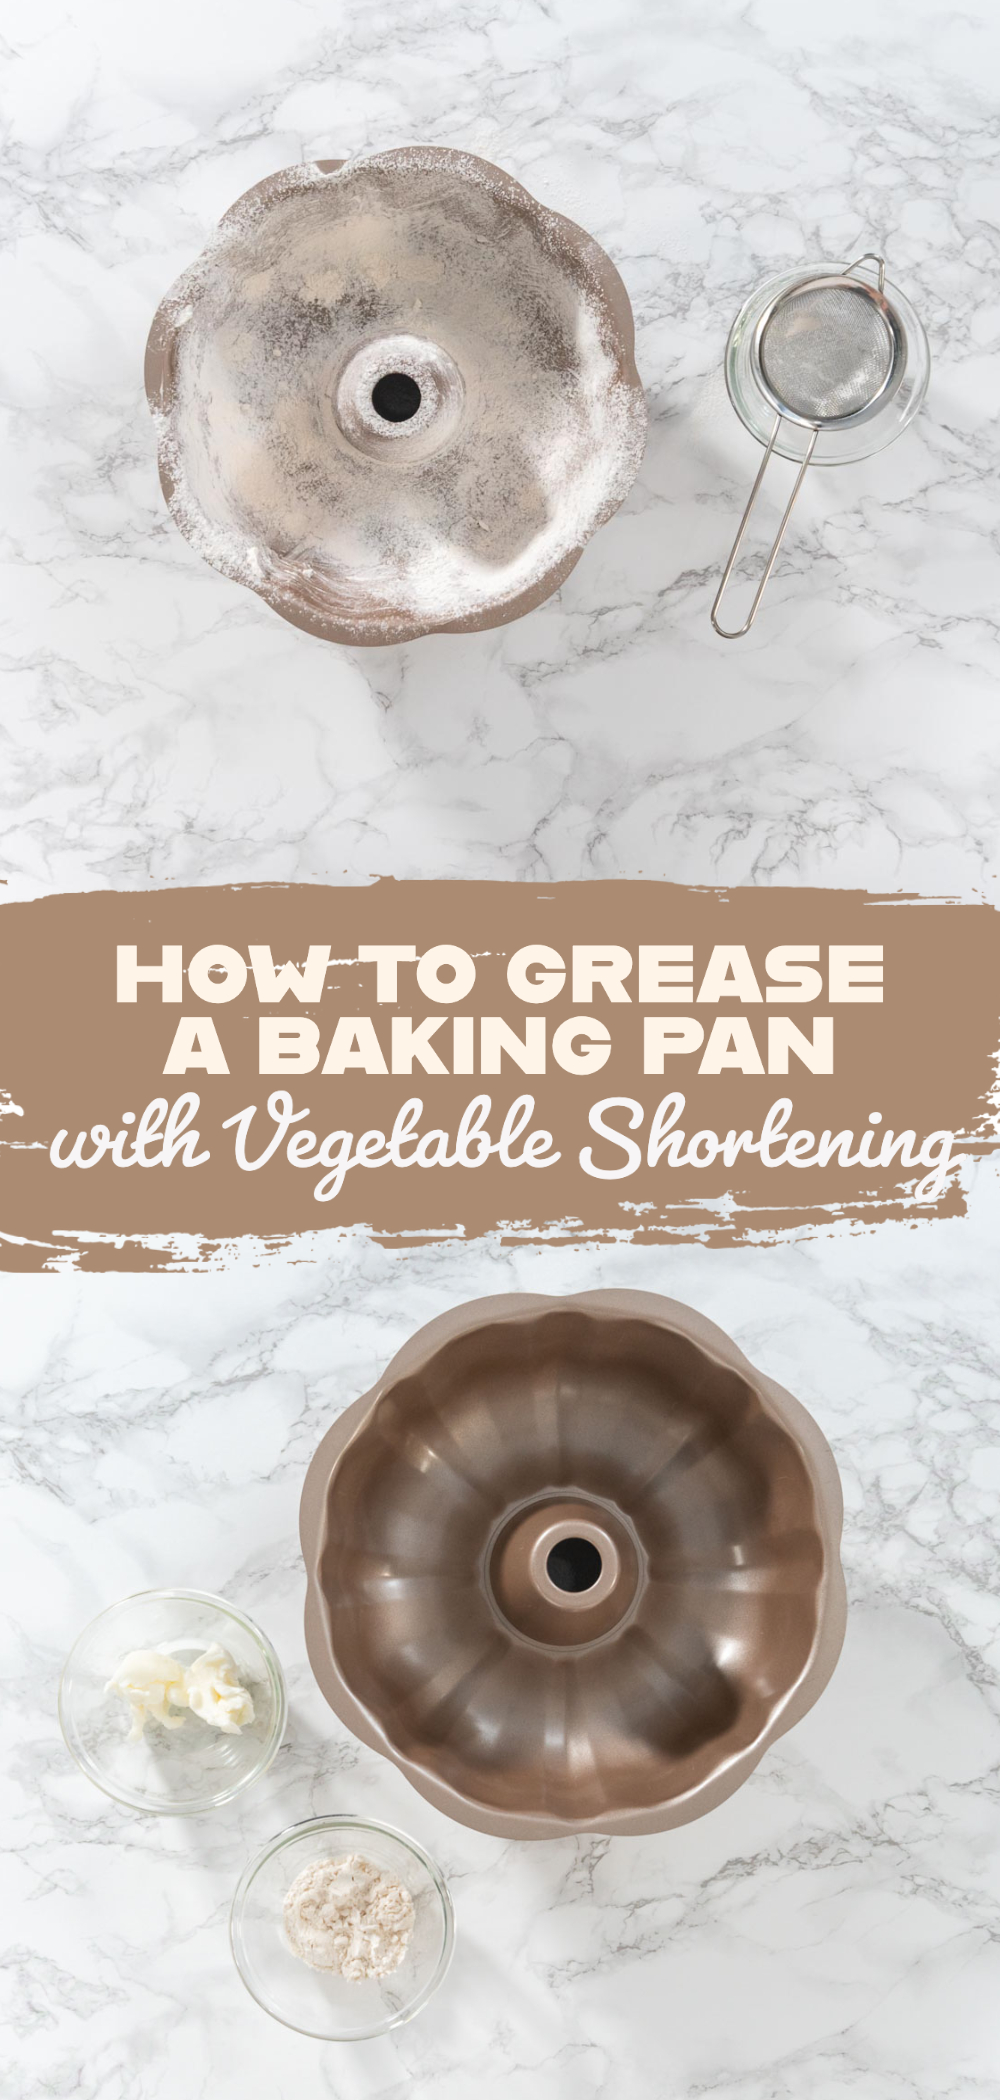 How to Grease a Baking Pan with Vegetable Shortening